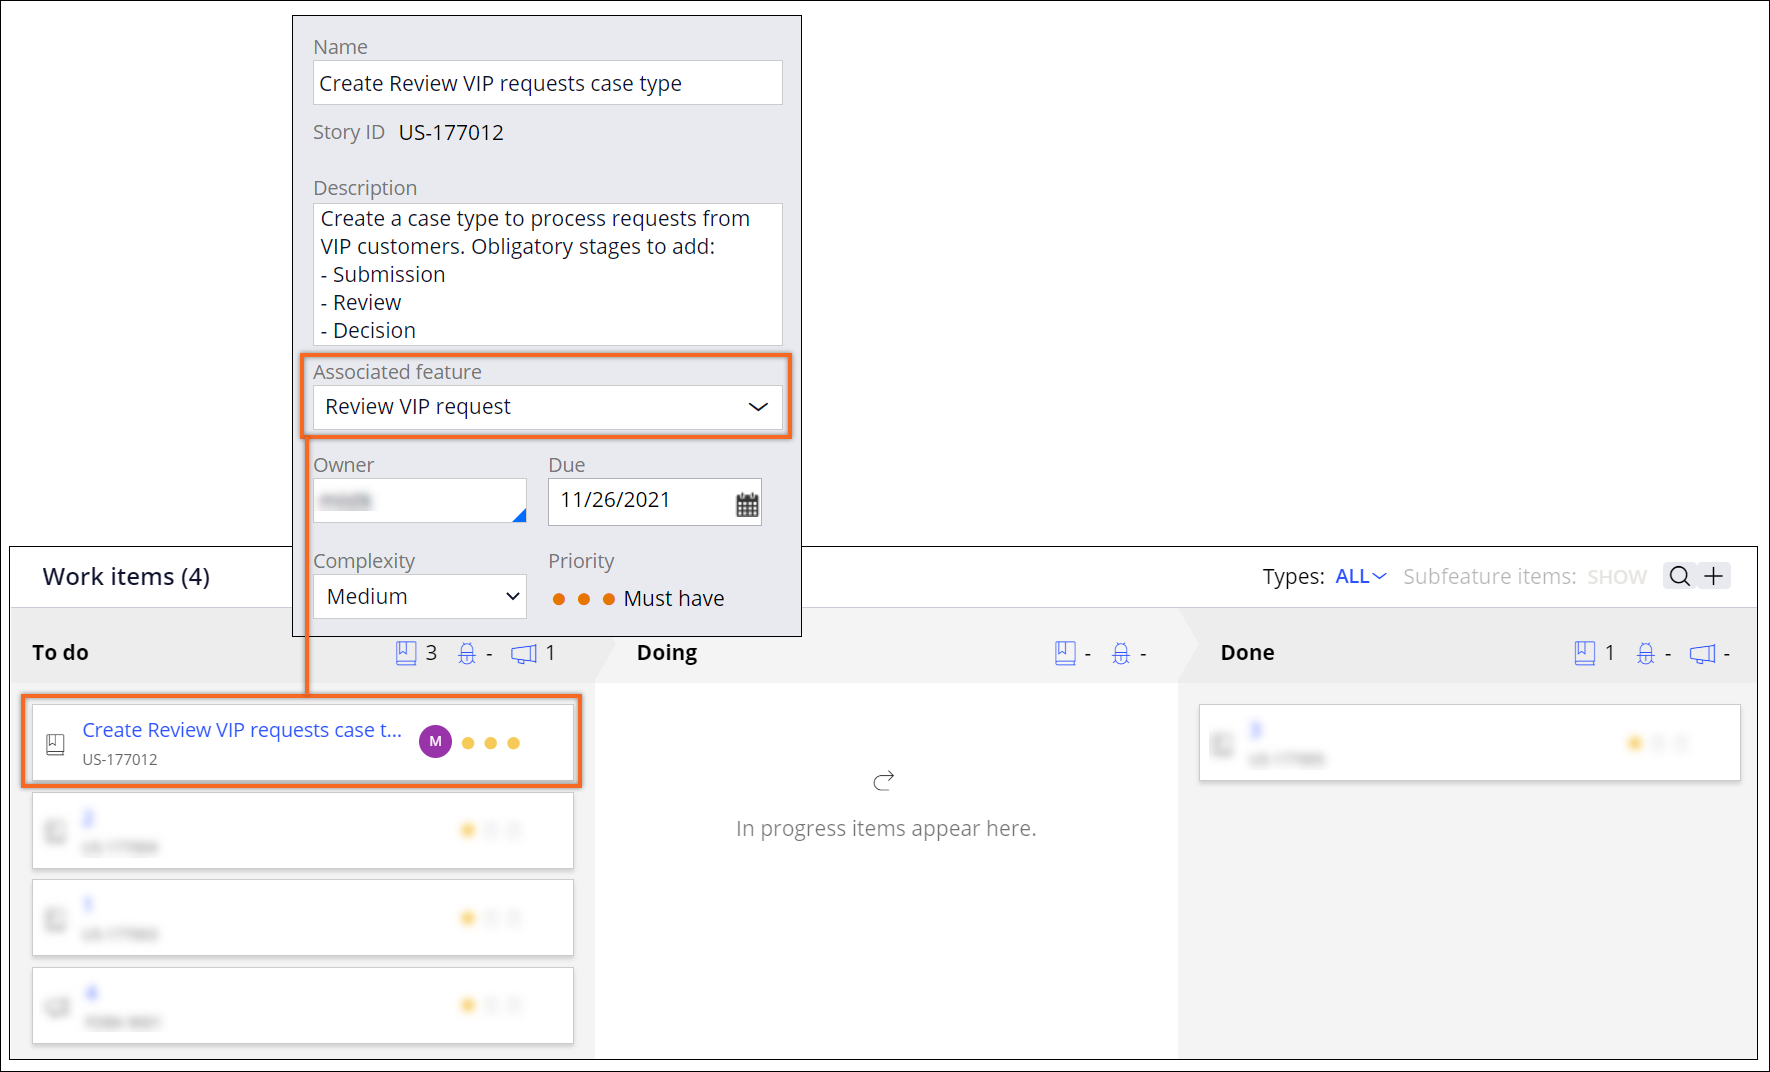 User story configuration and view in the feature work items.